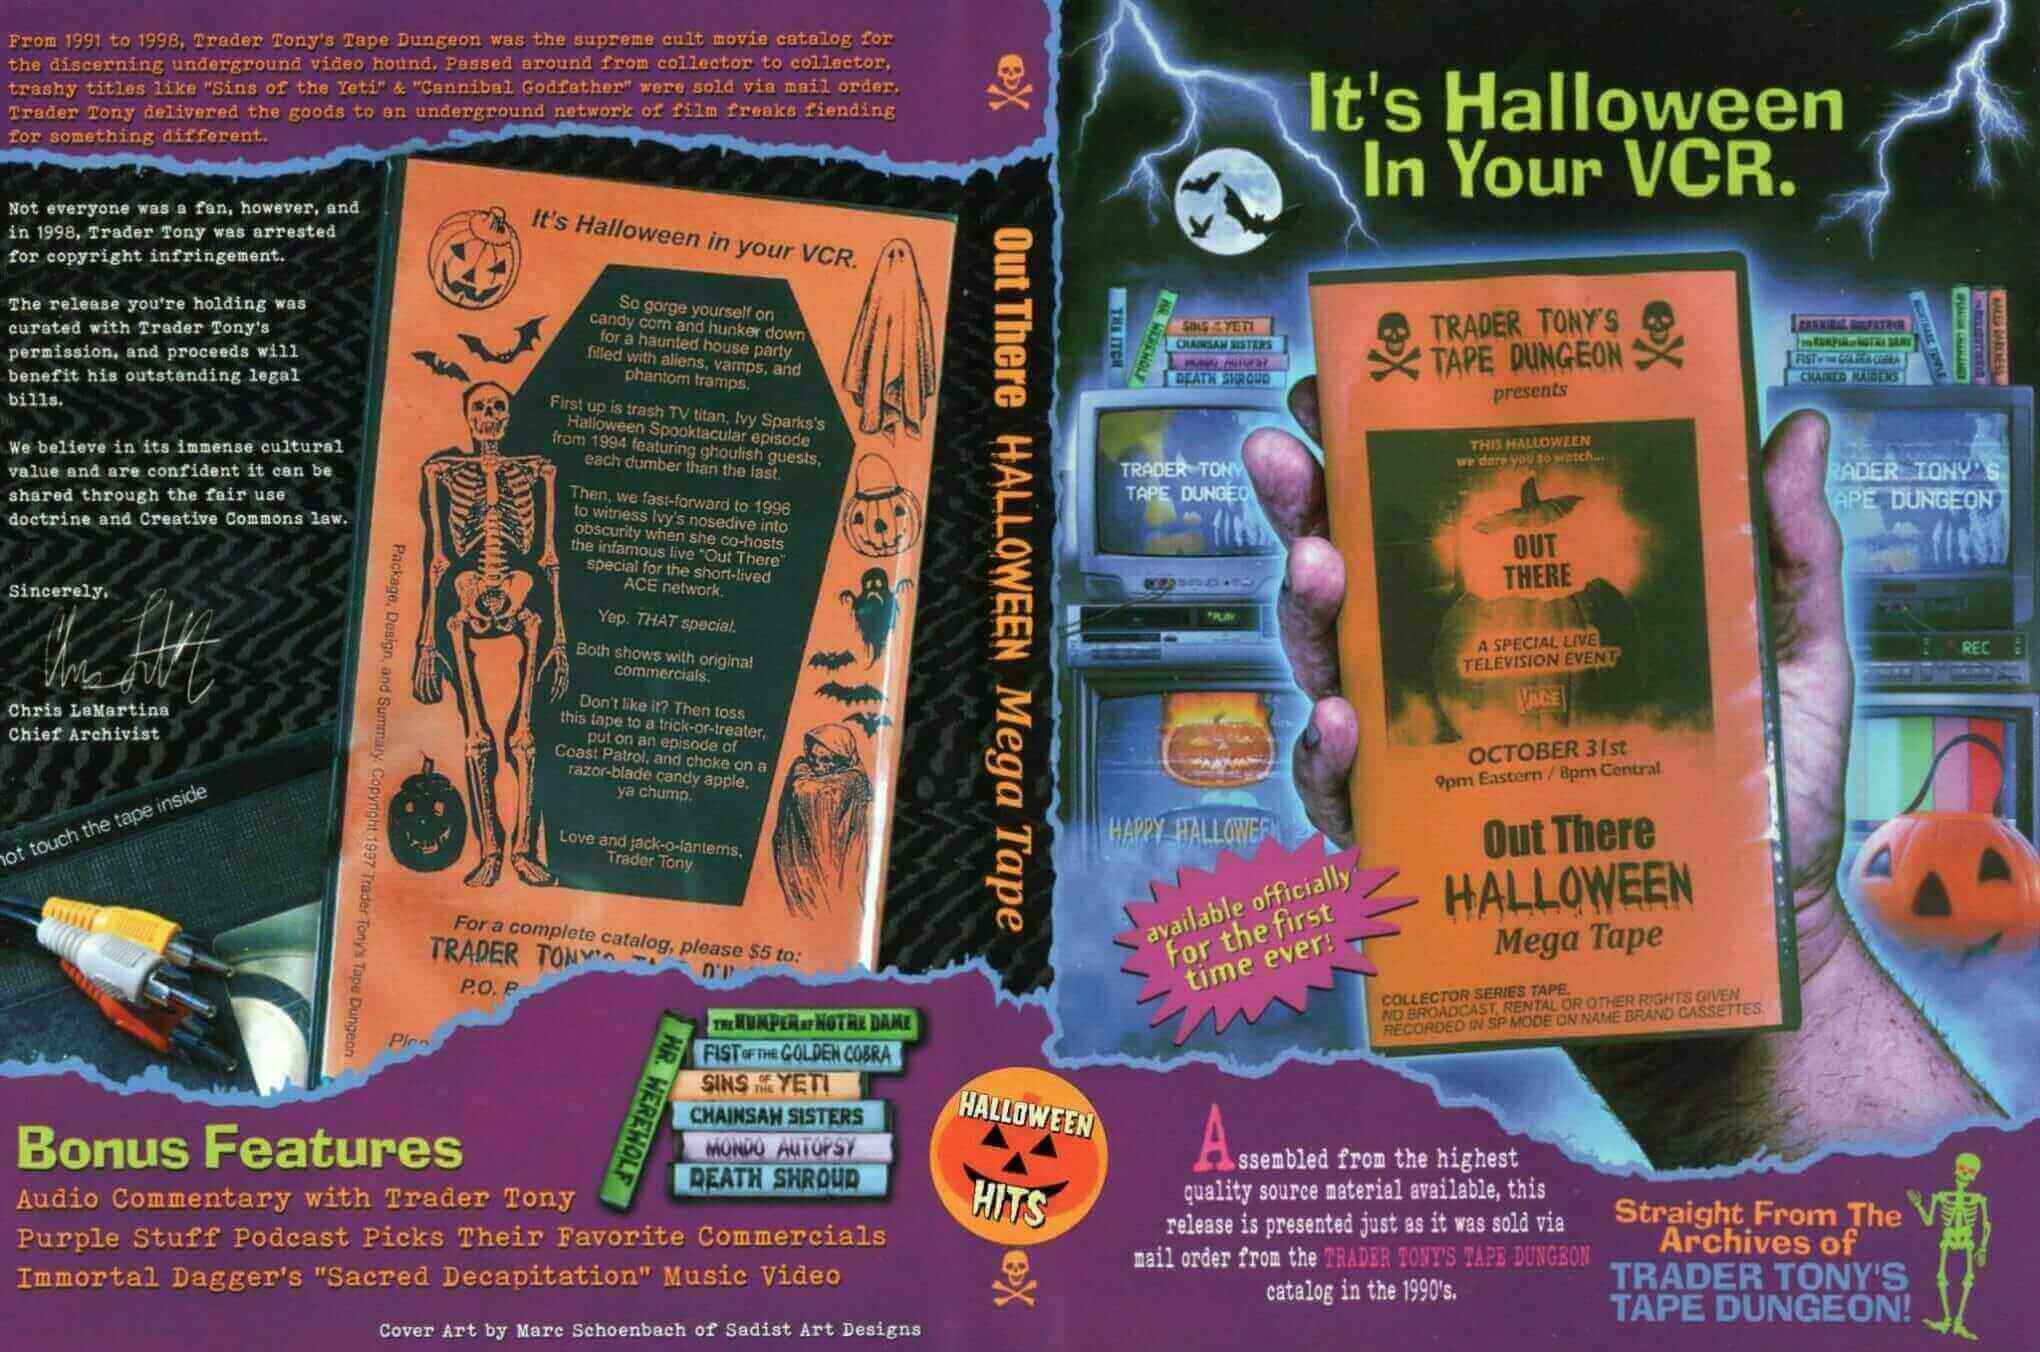 Out There Halloween Mega Tape Dvd Cover Scaled